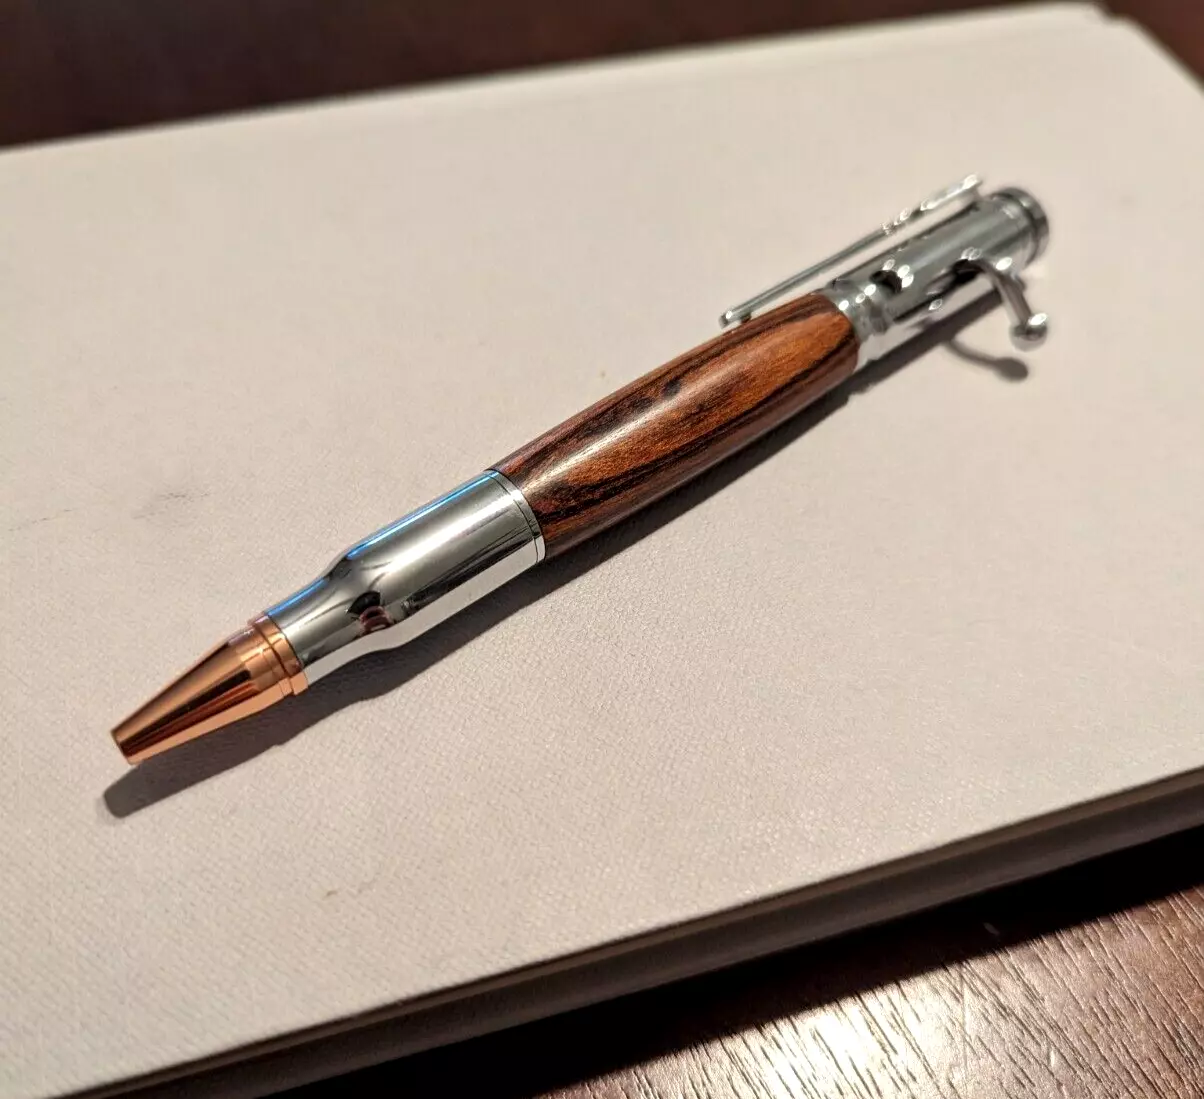 Bolt Action Pen Bullet Pen Metal Wood Material Great Gift For Dad Friend - $13.00